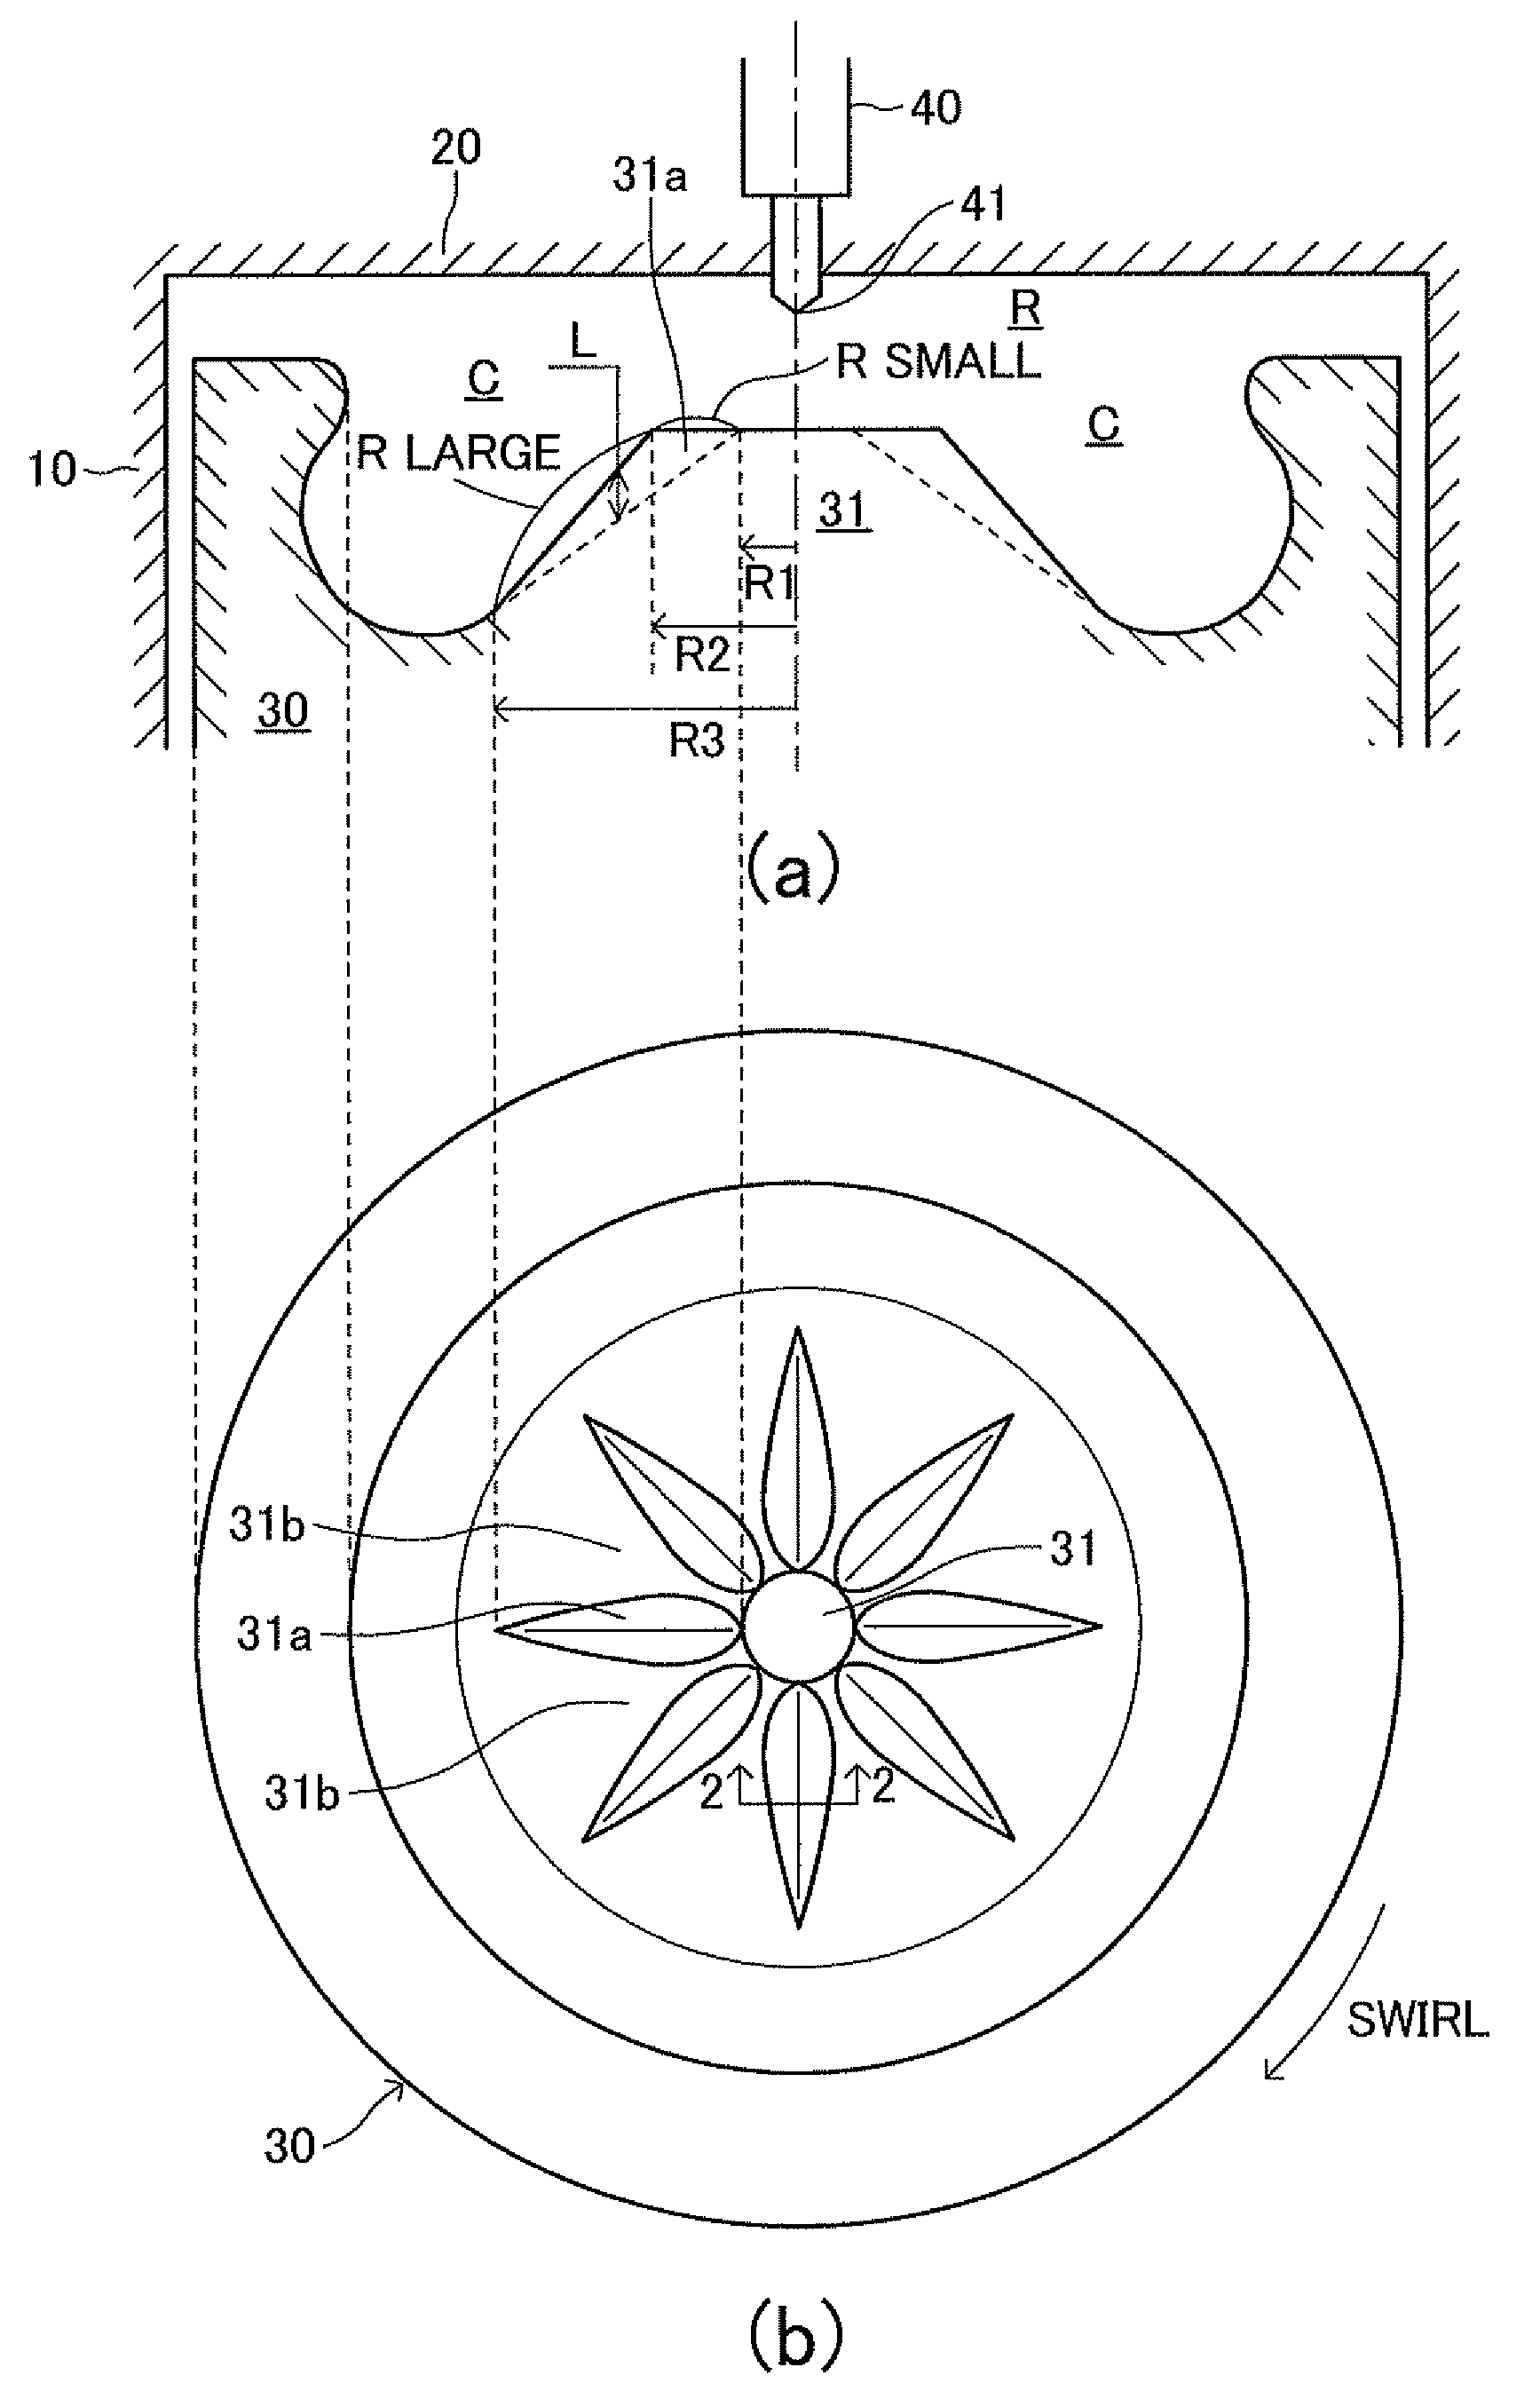 Direct-injection type engine